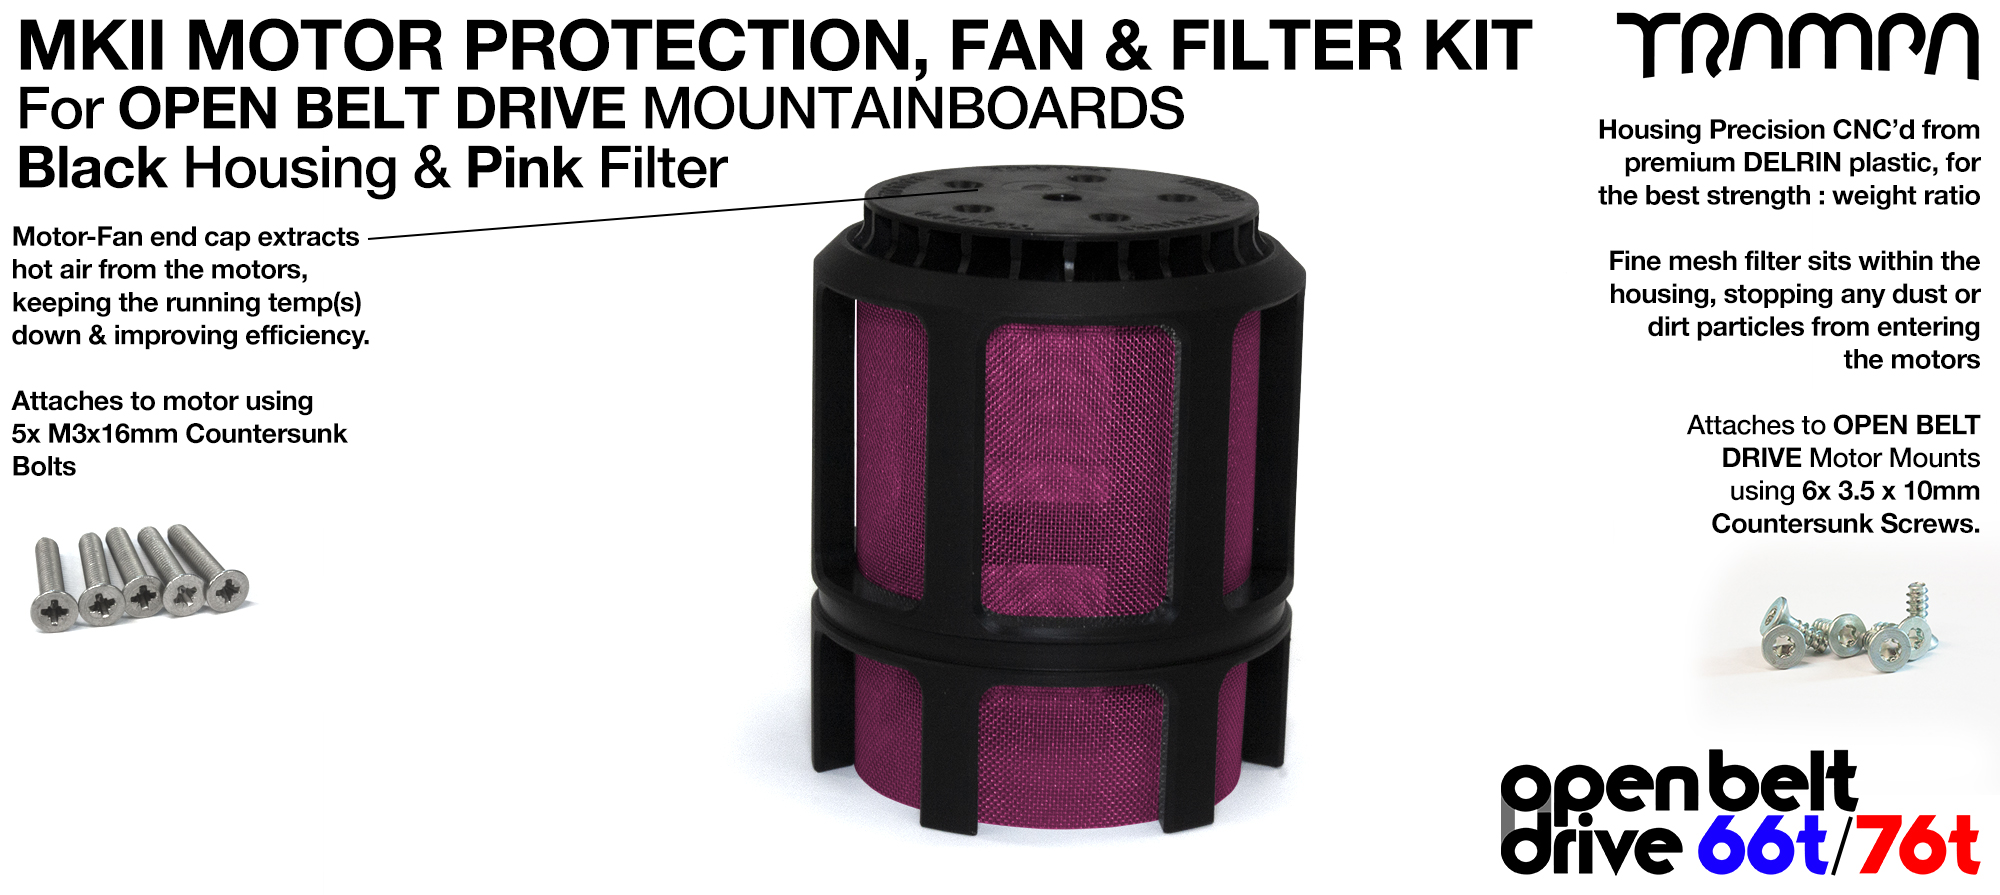 FULL CAGE Motor protection SUPER STRONG DELRIN Plastic includes Fan & PINK Filter - SINGLE